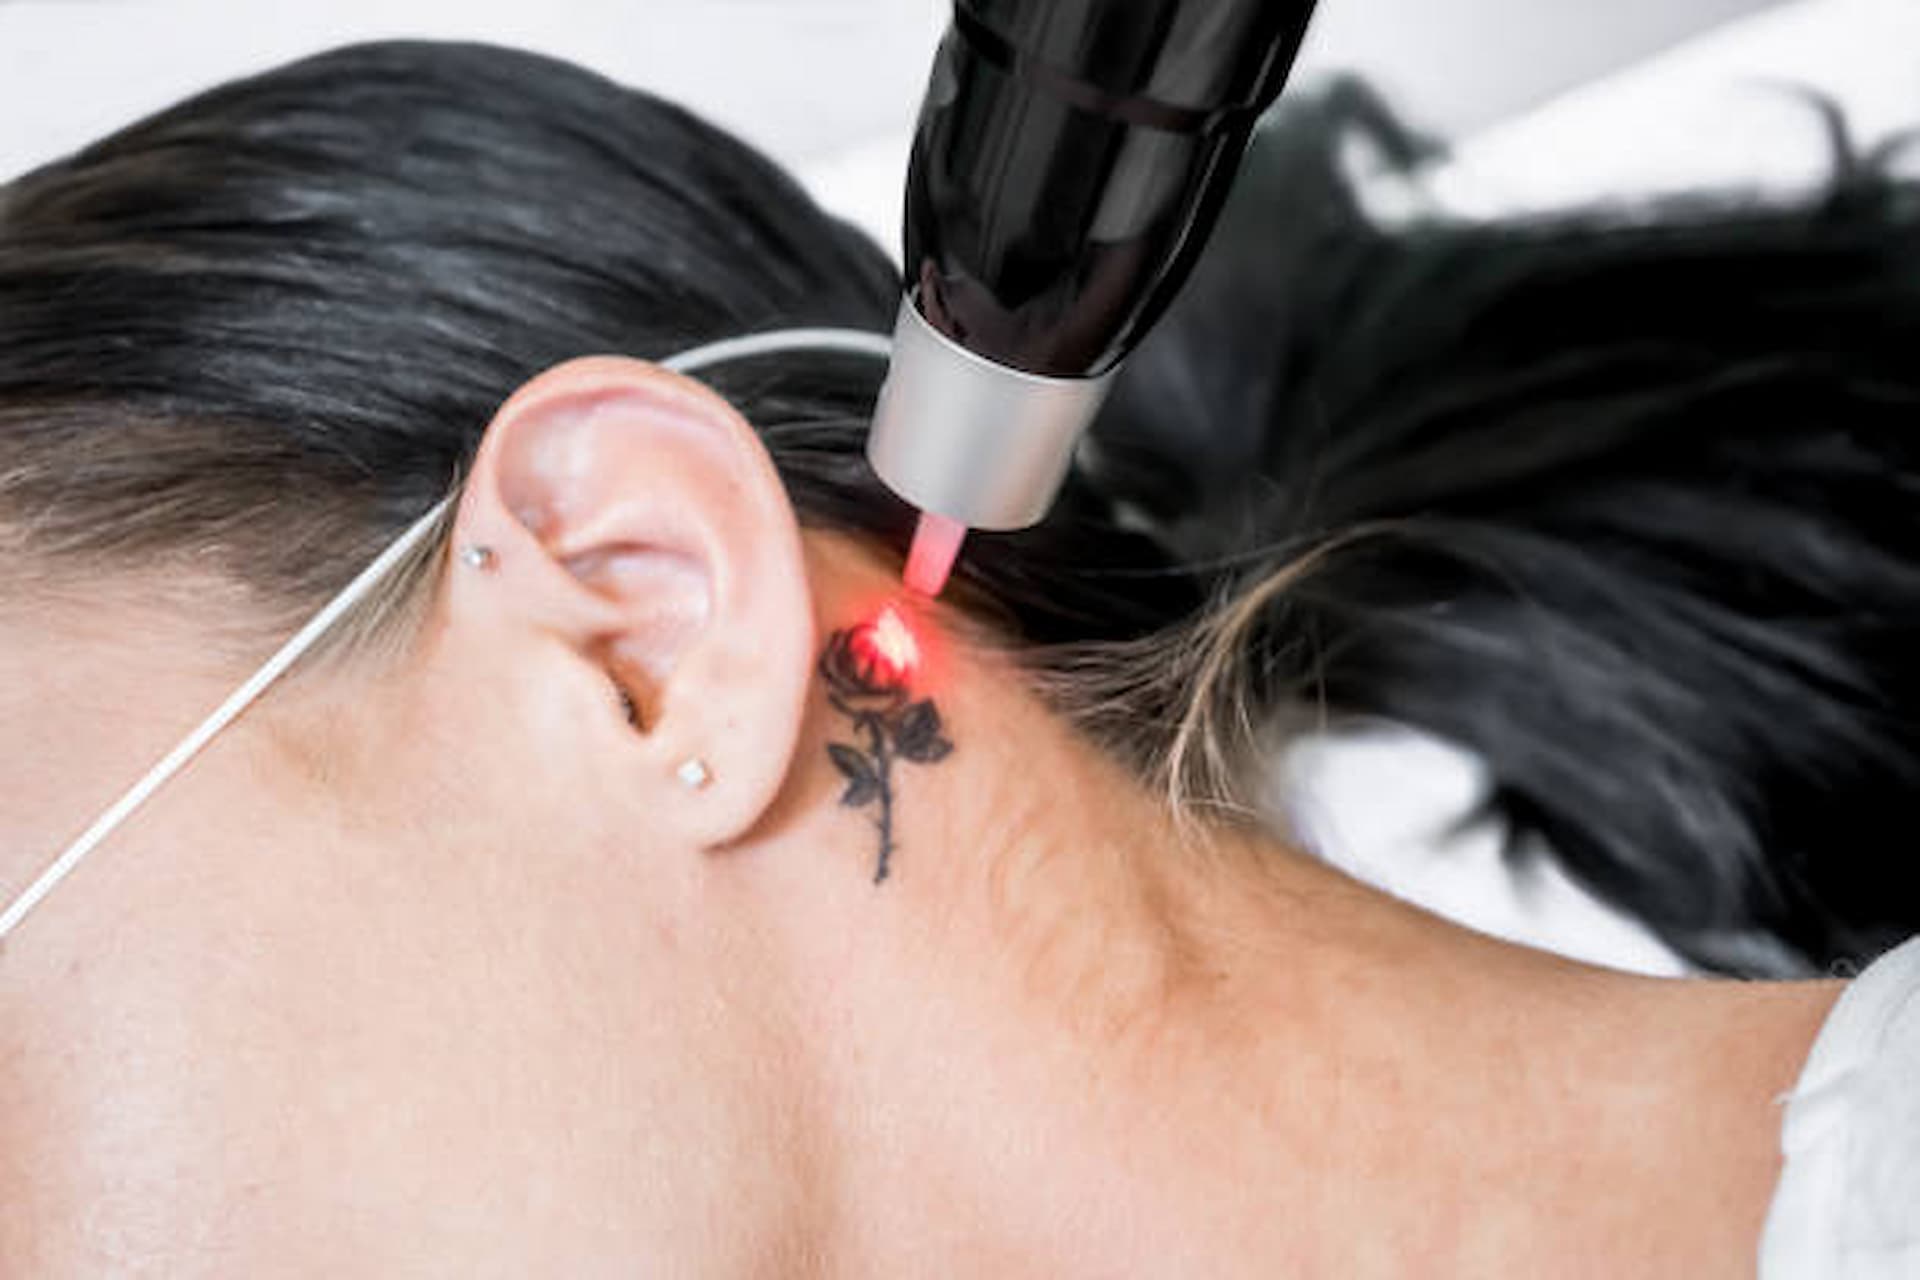 What To Expect During A Laser Tattoo Removal Session